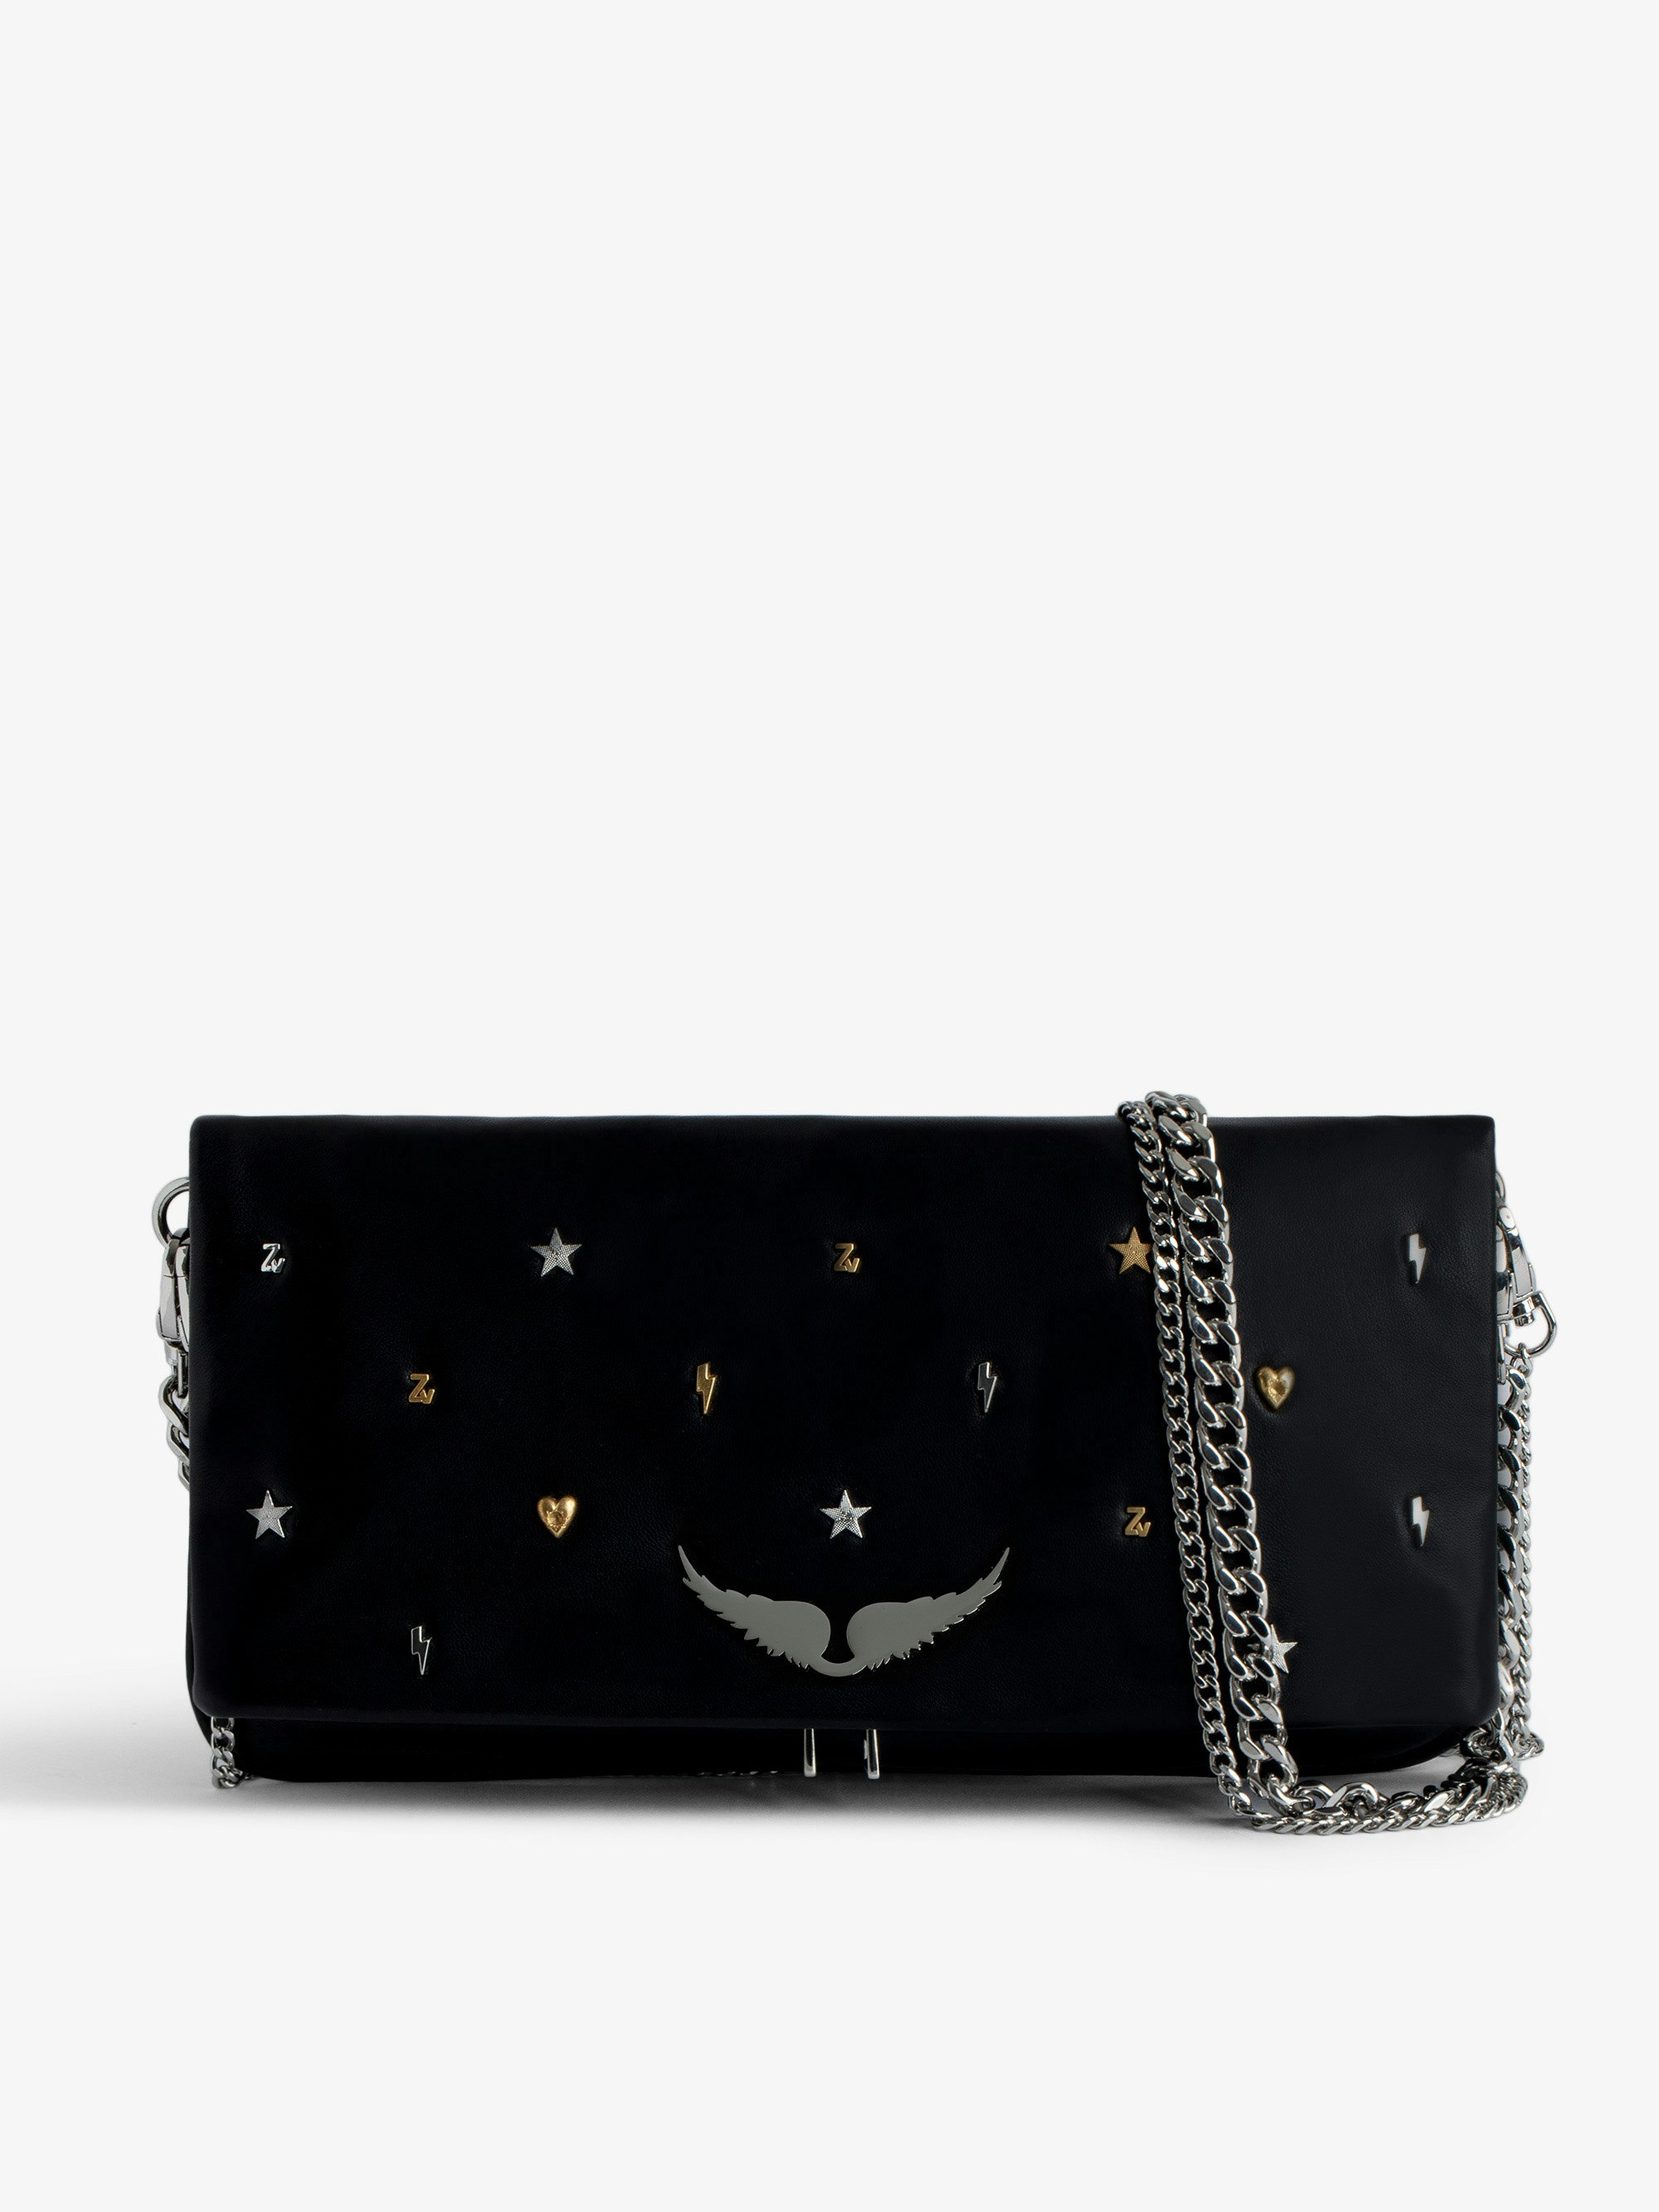 Rock Lucky Charms Clutch - Women’s black smooth leather clutch with double metal chains decorated with lucky charms.